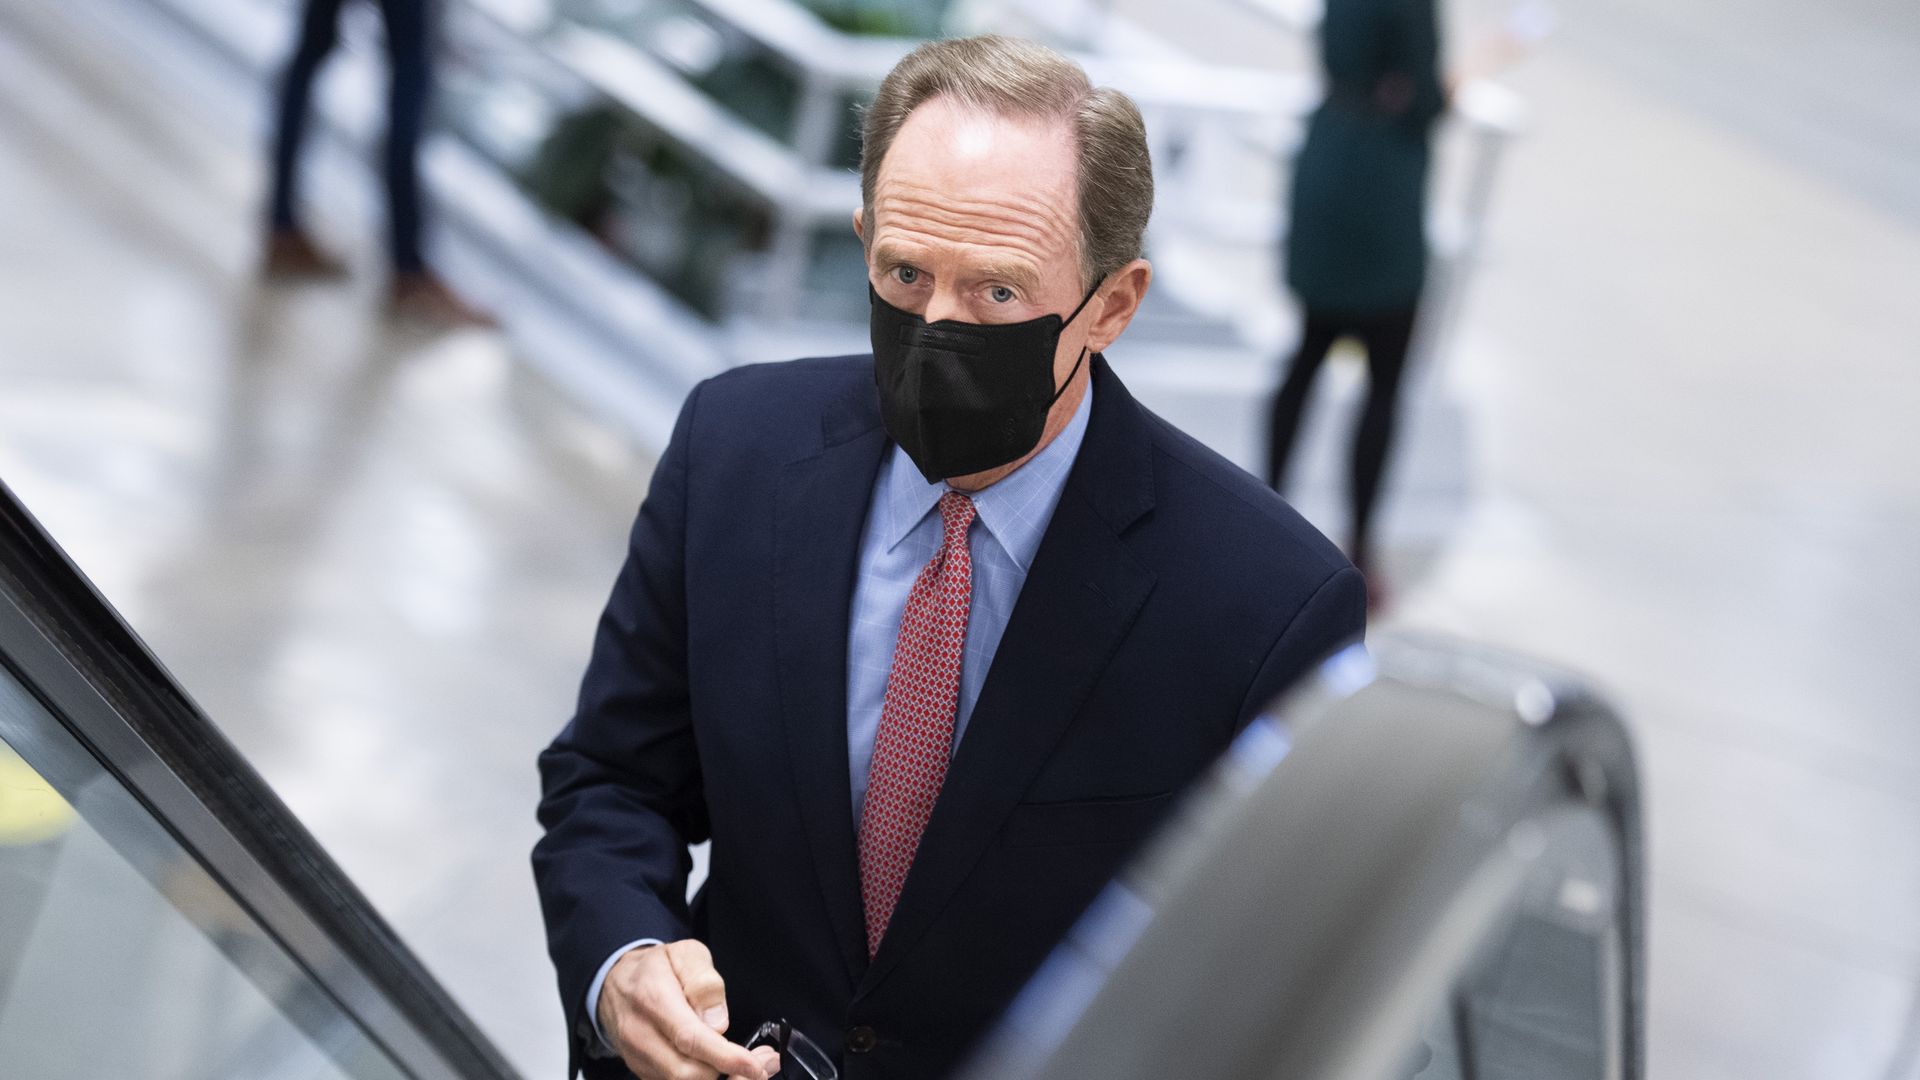 Pat Toomey wears a face mask while walking on an escalator 